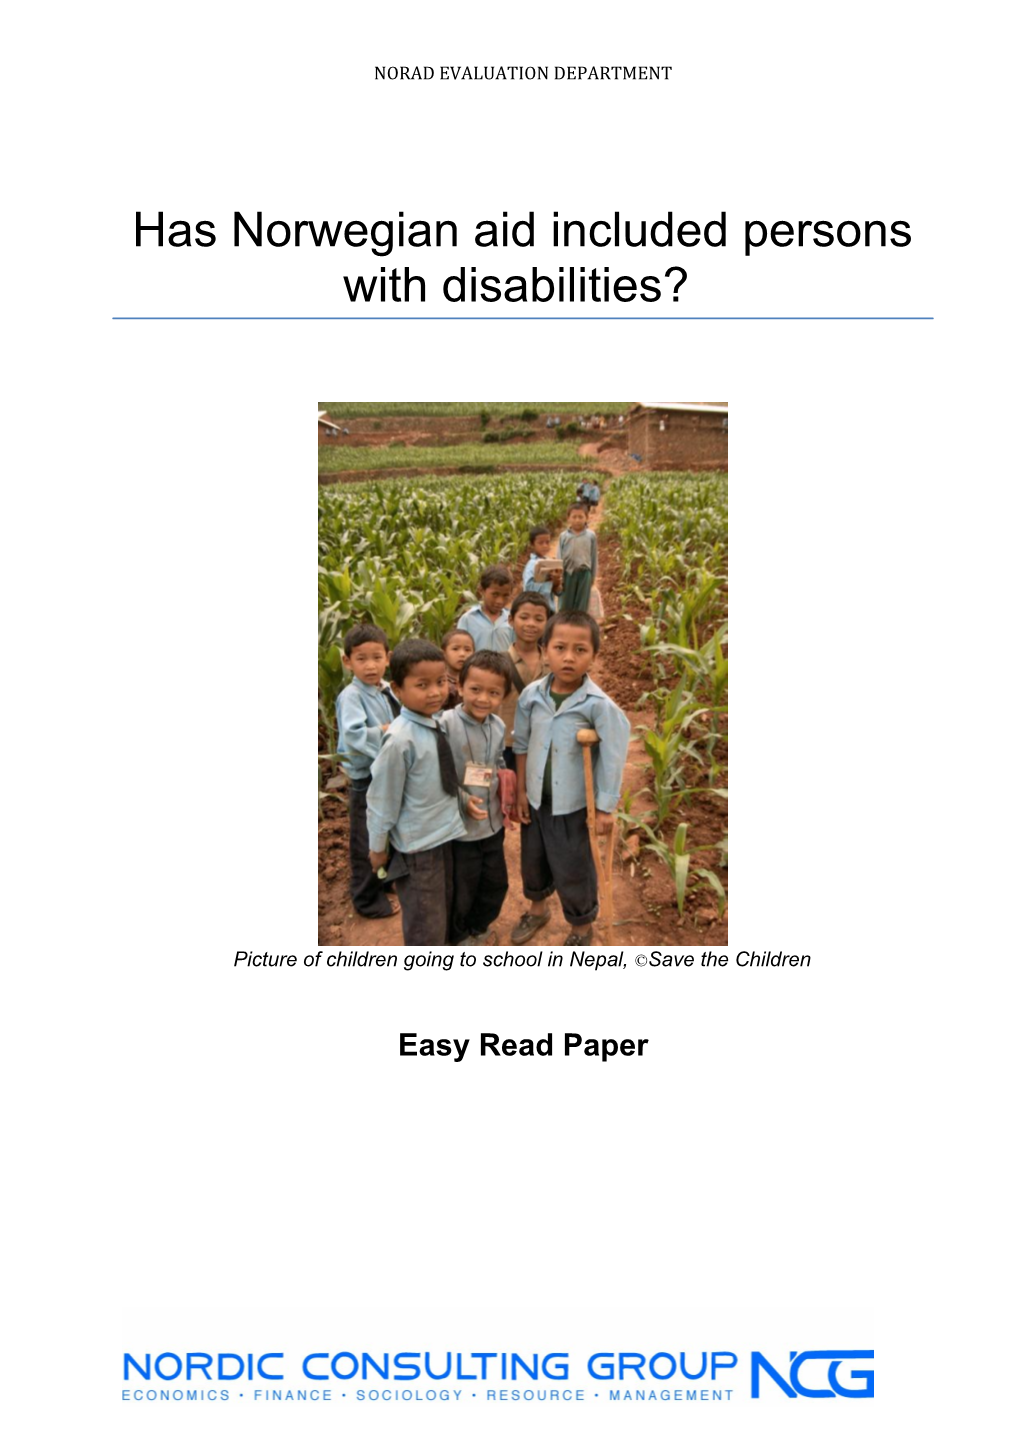 Has Norwegian Aid Included Persons with Disabilities?